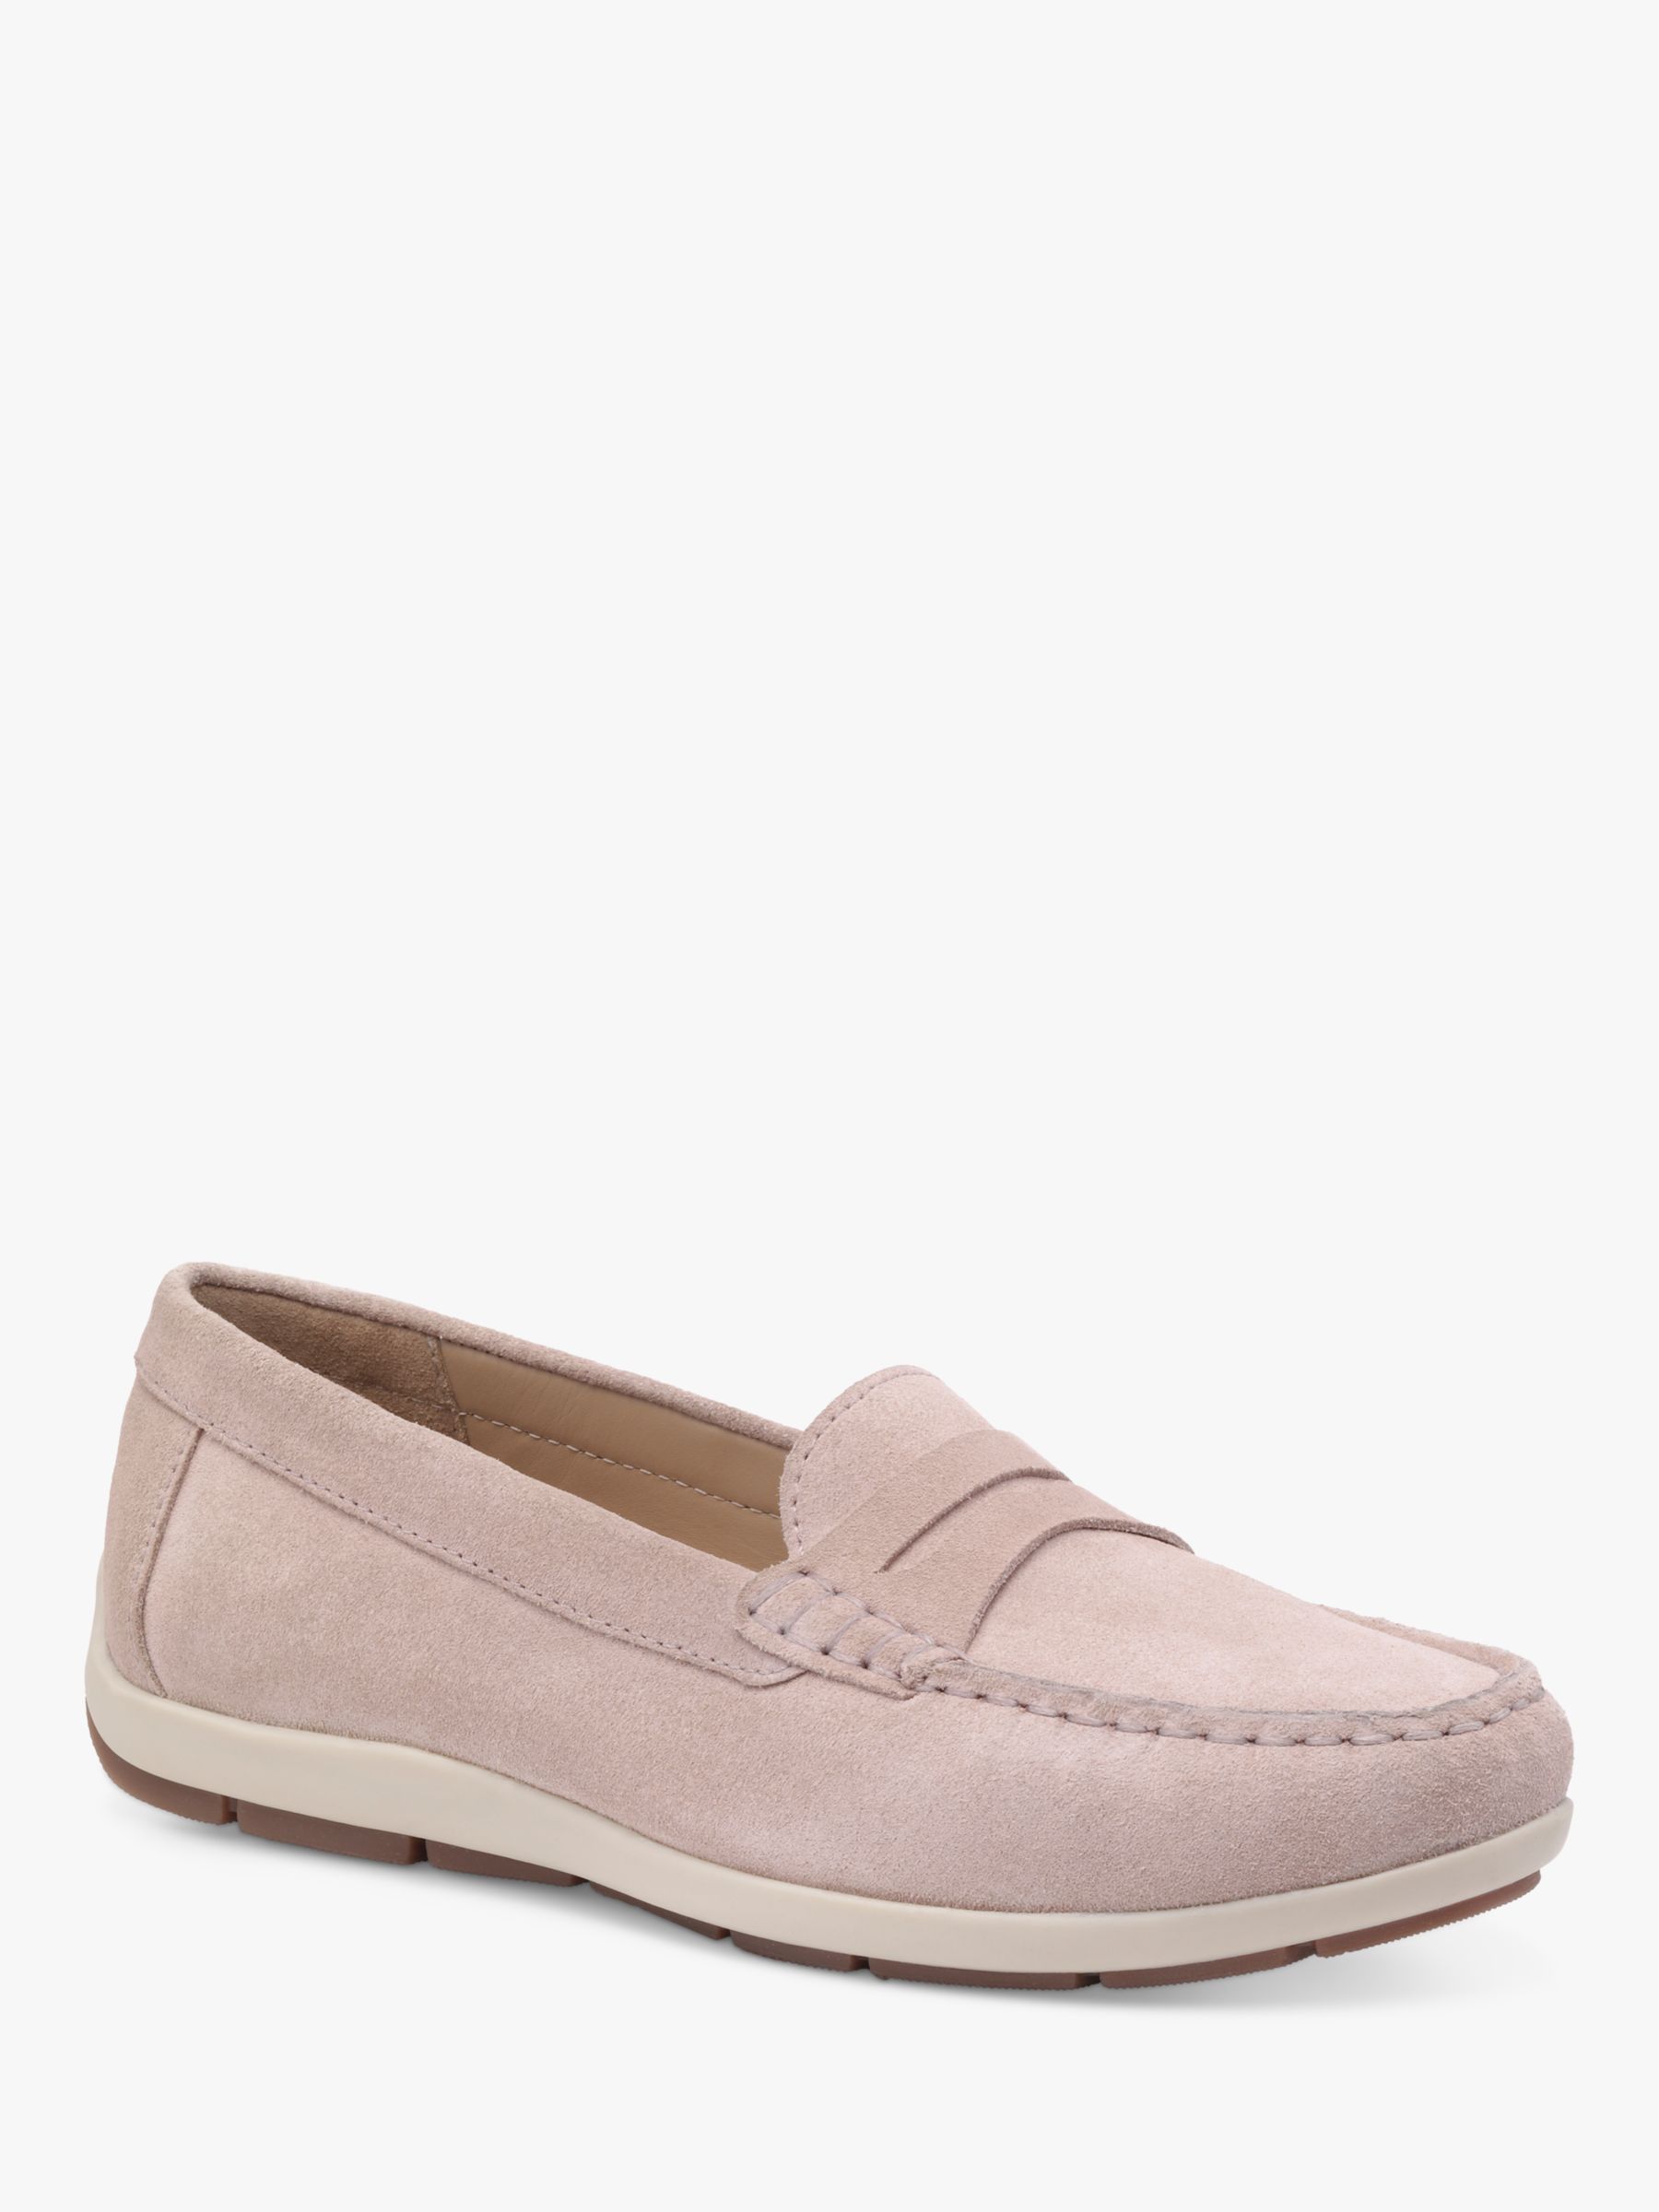 Pier Loafers, Blush at John Lewis Partners